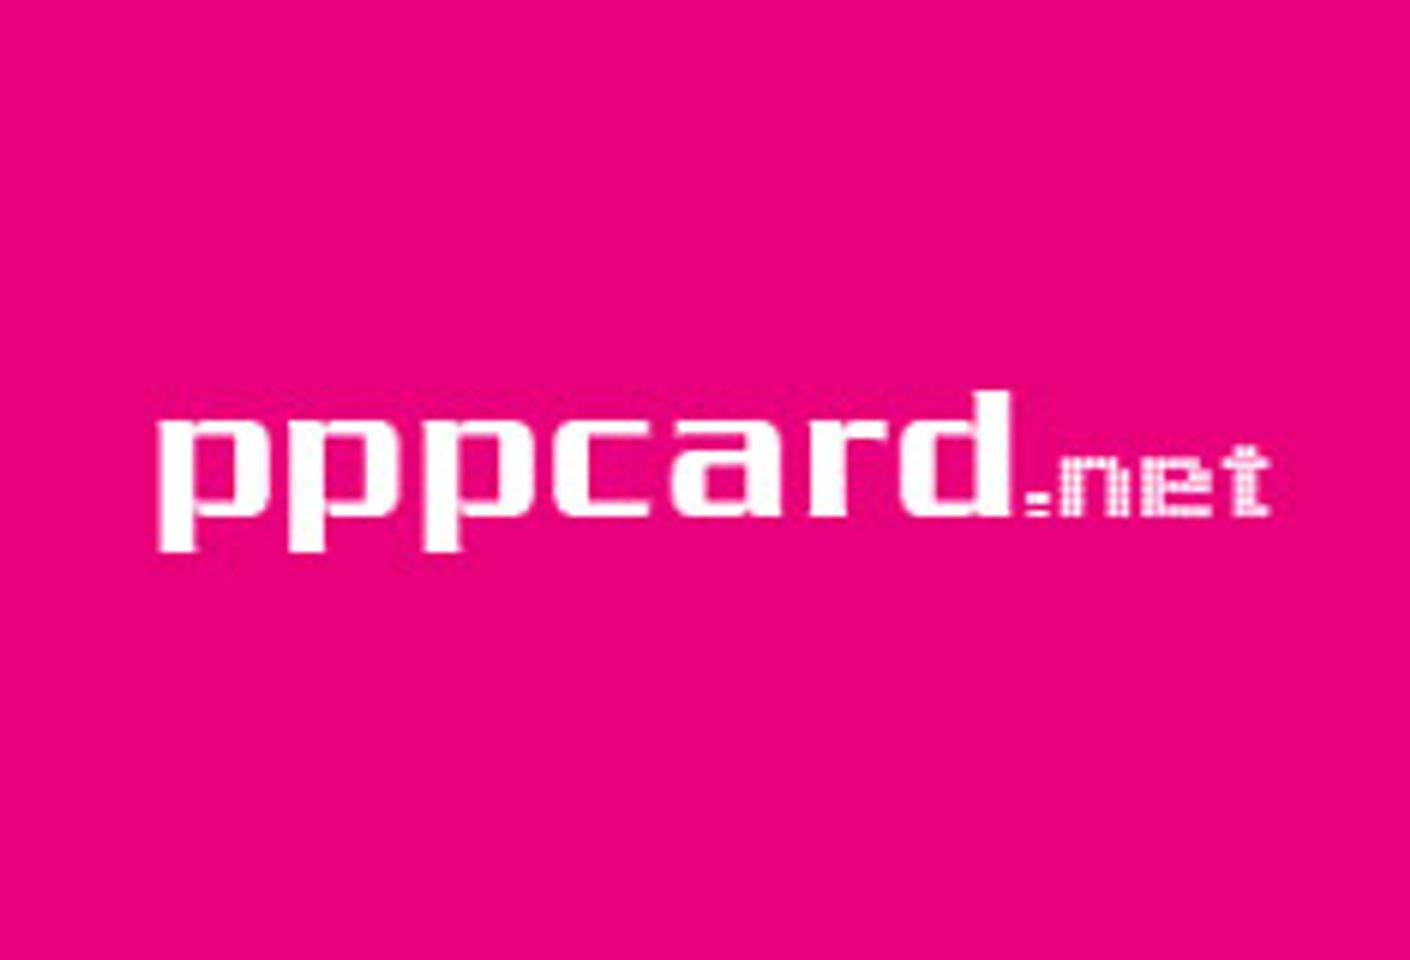 Prepay for Porn With PPPCard